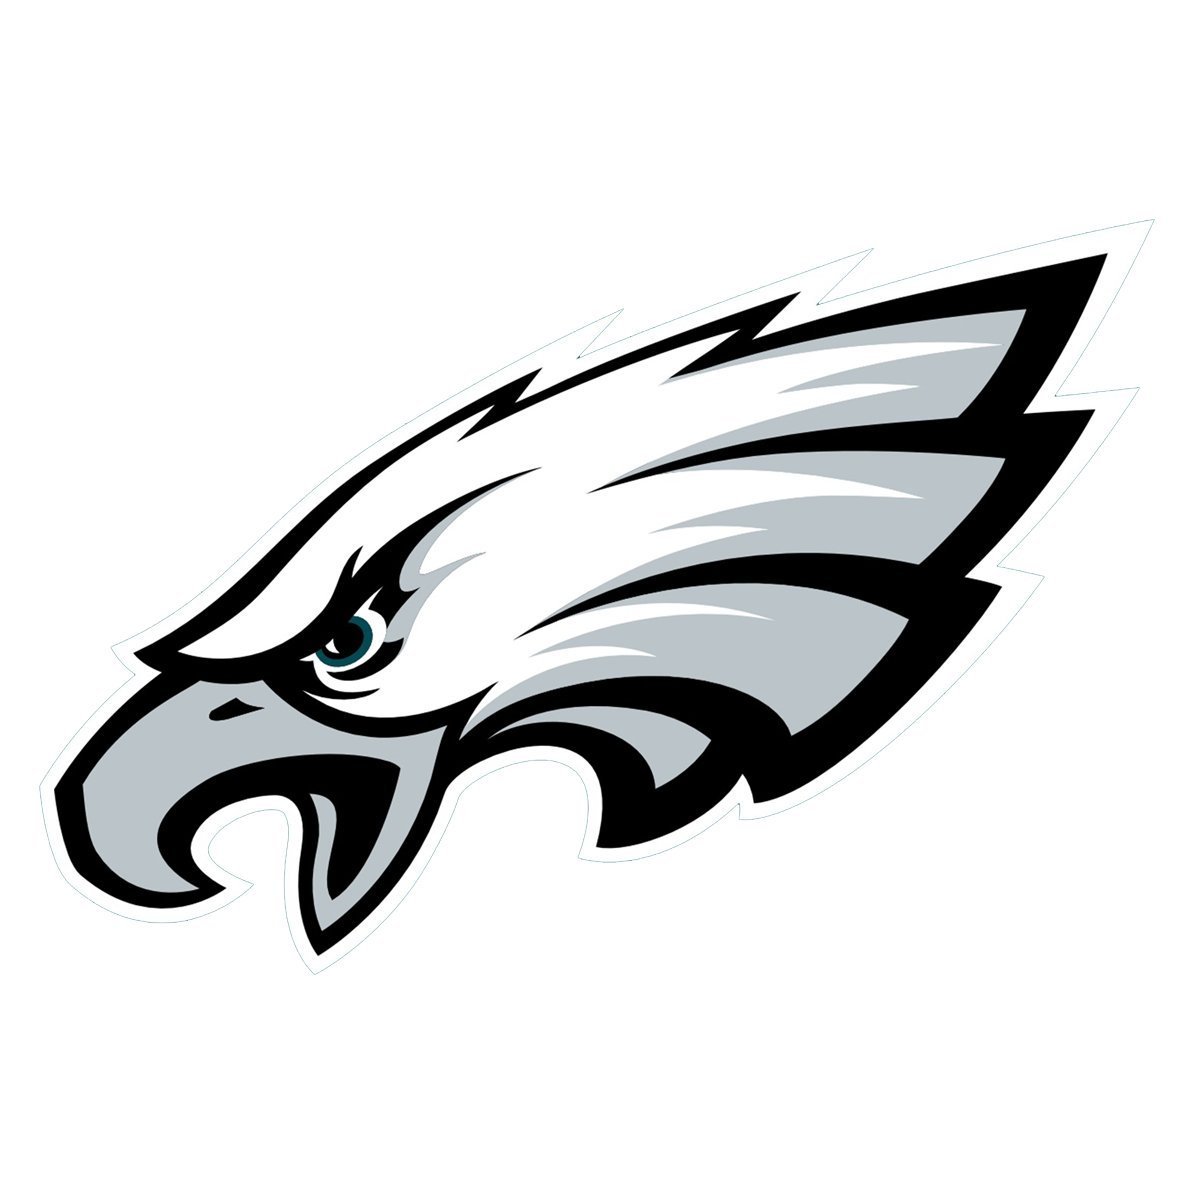 Philadelphia Eagles Drawings Free download on ClipArtMag